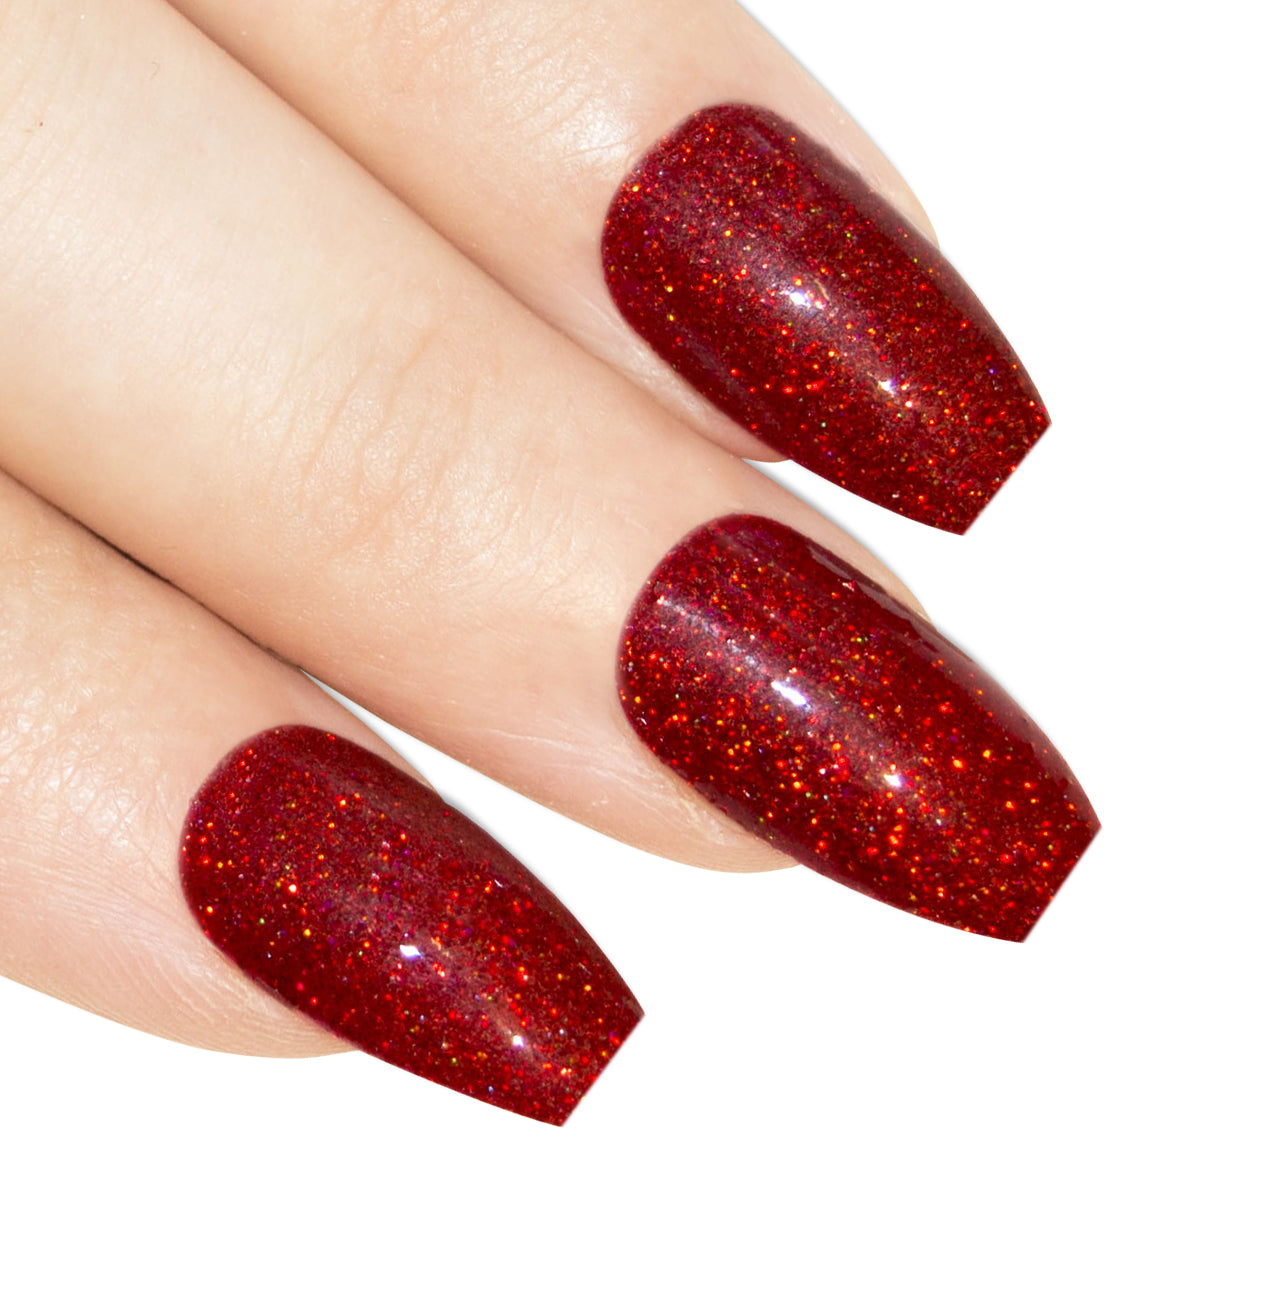 False Nails by Bling Art Red Gel Ballerina Coffin 24 Fake Long Nail at £6.99 GBP only from Bling Art